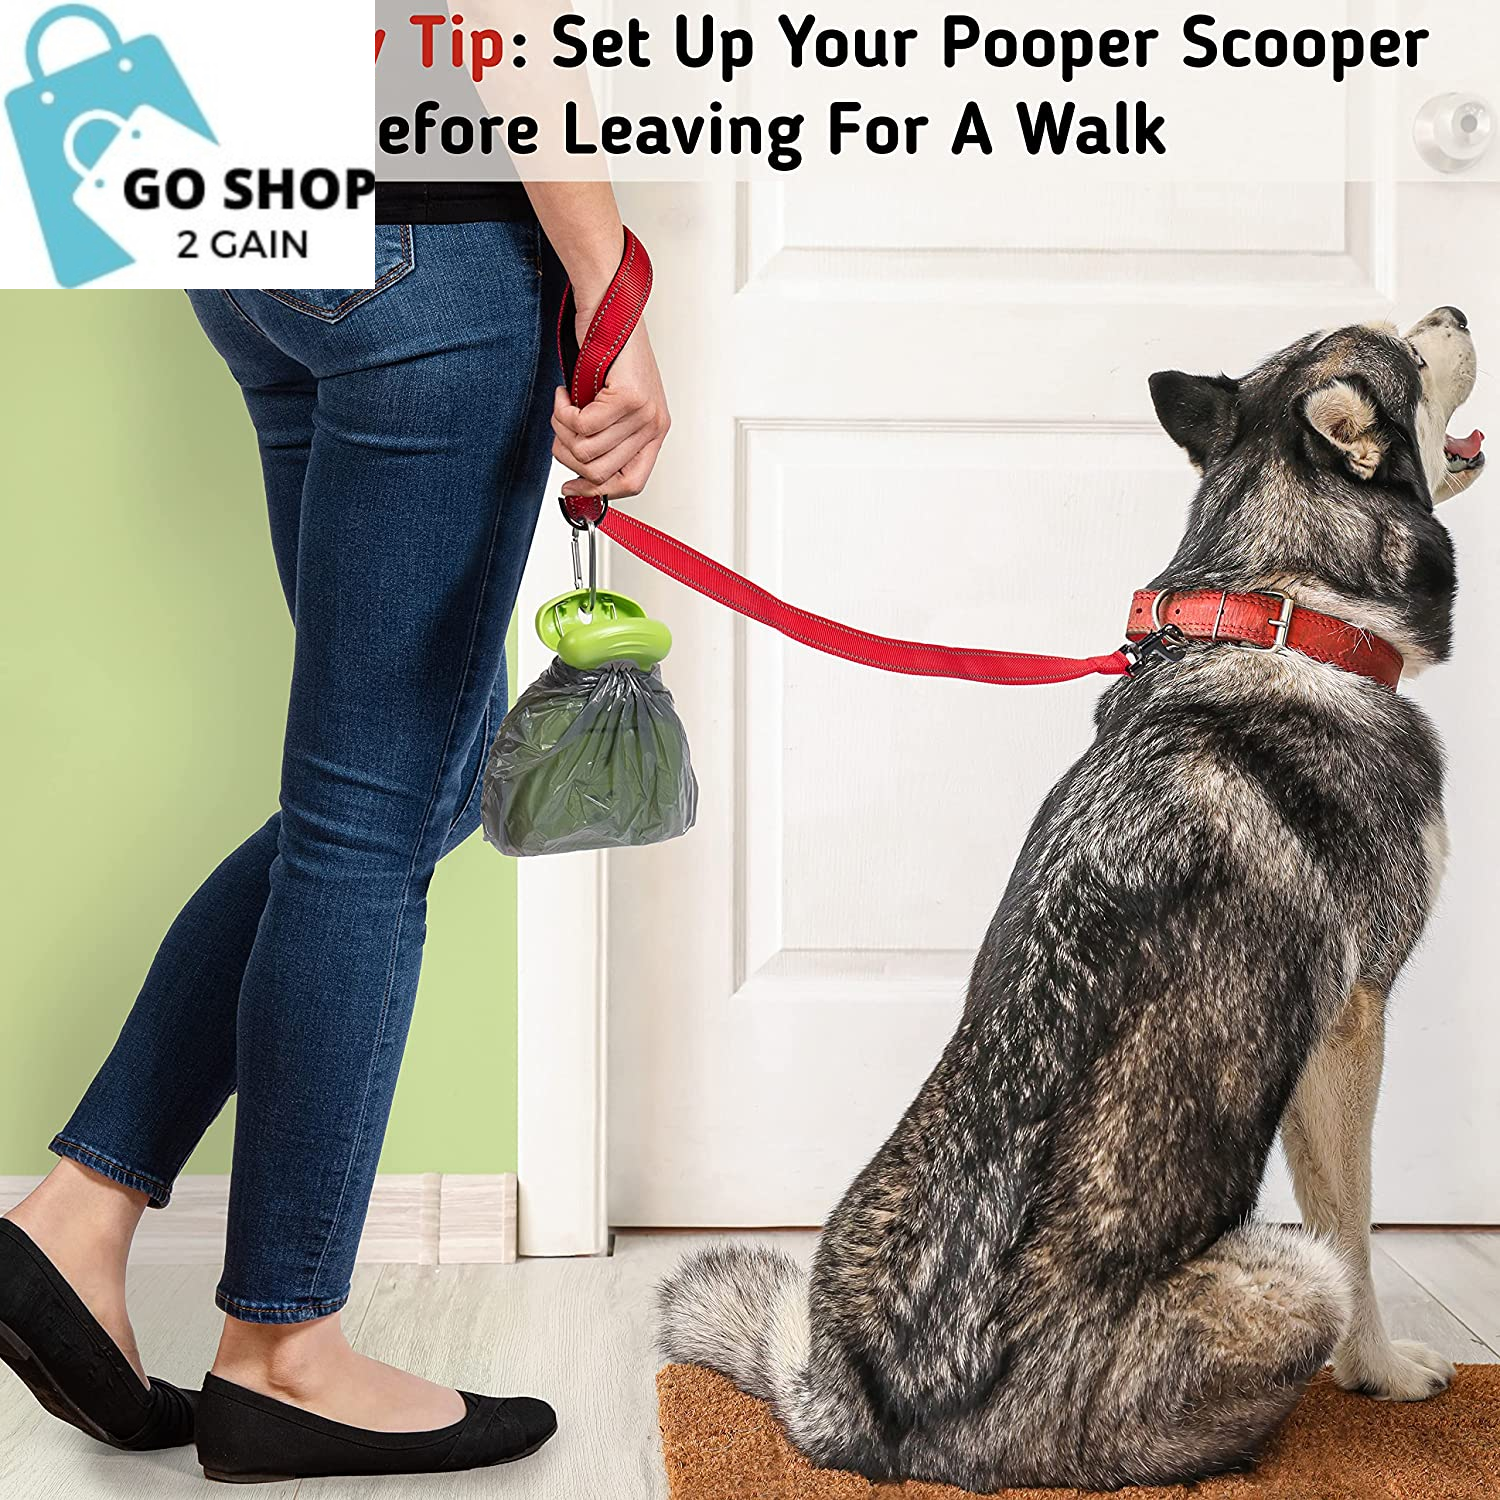 Portable Dog Poop Scooper, Sanitary Waste Pick Up, Heavy Duty Cleaner with Dispenser, Leash Clip and Pooper Scooper Bags Included (Medium, Kiwi)